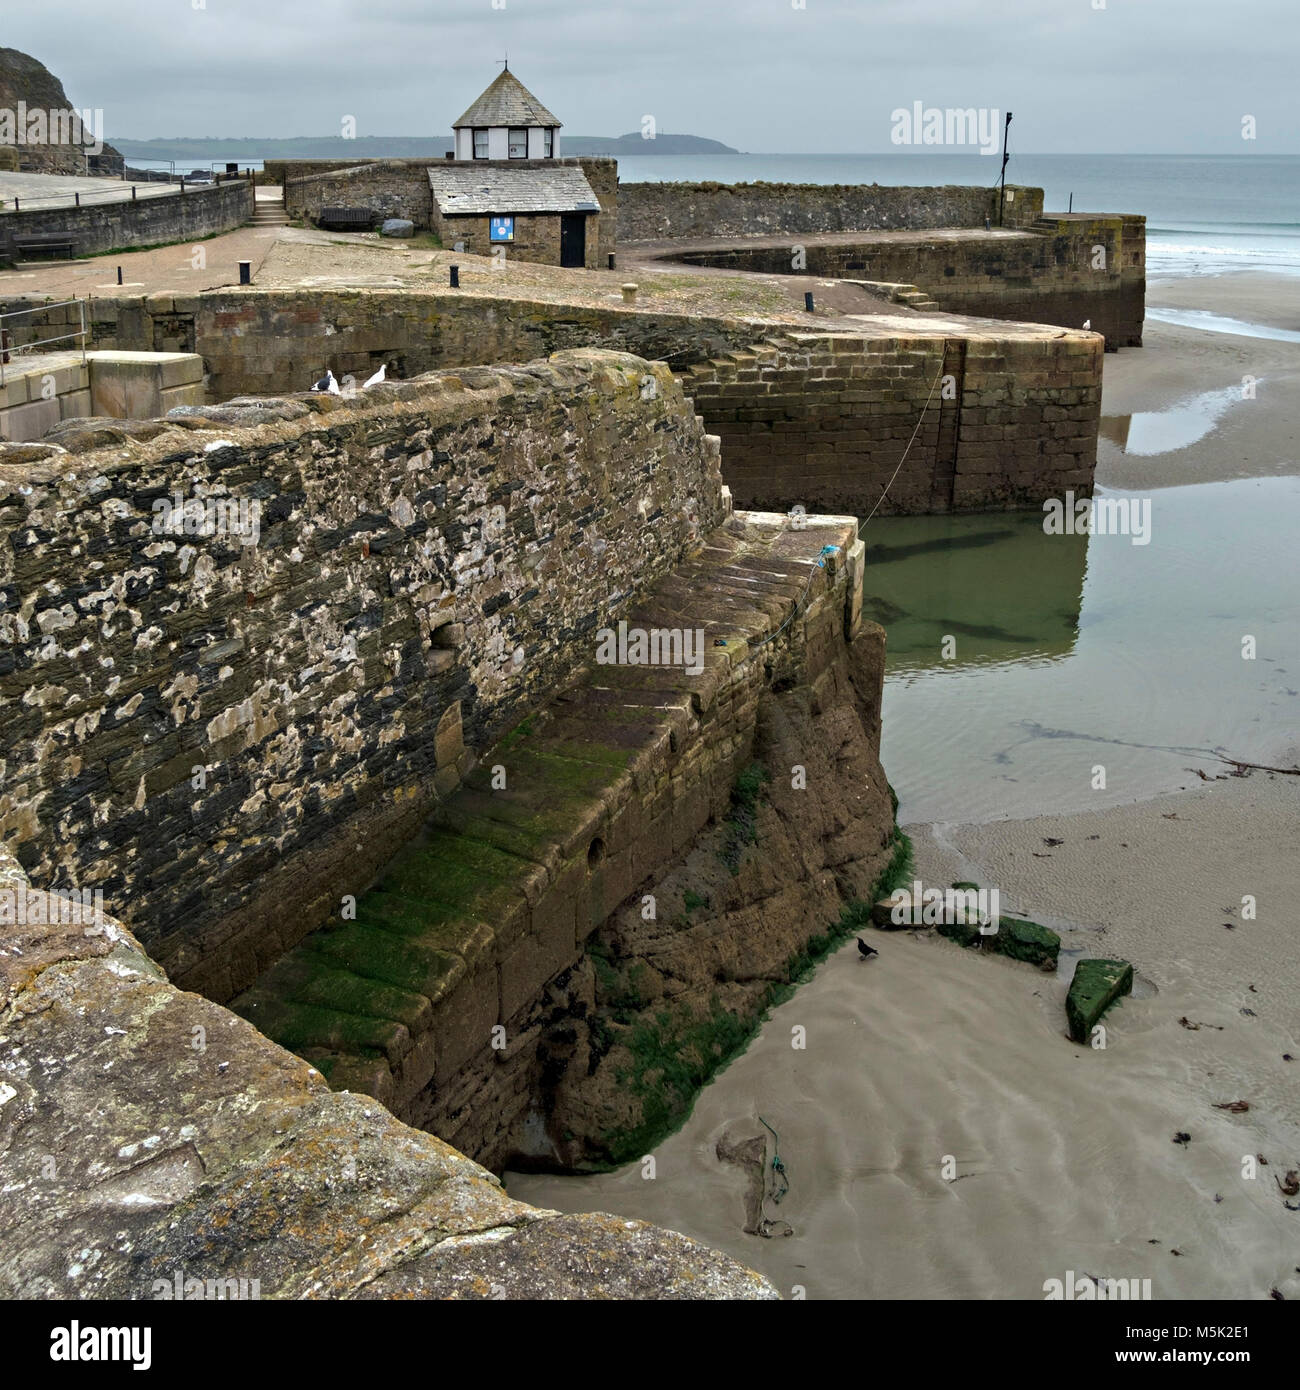 Old coastal sea defences and granite harbour walls, Charlestown Harbour, Cornwall, England, UK Stock Photo